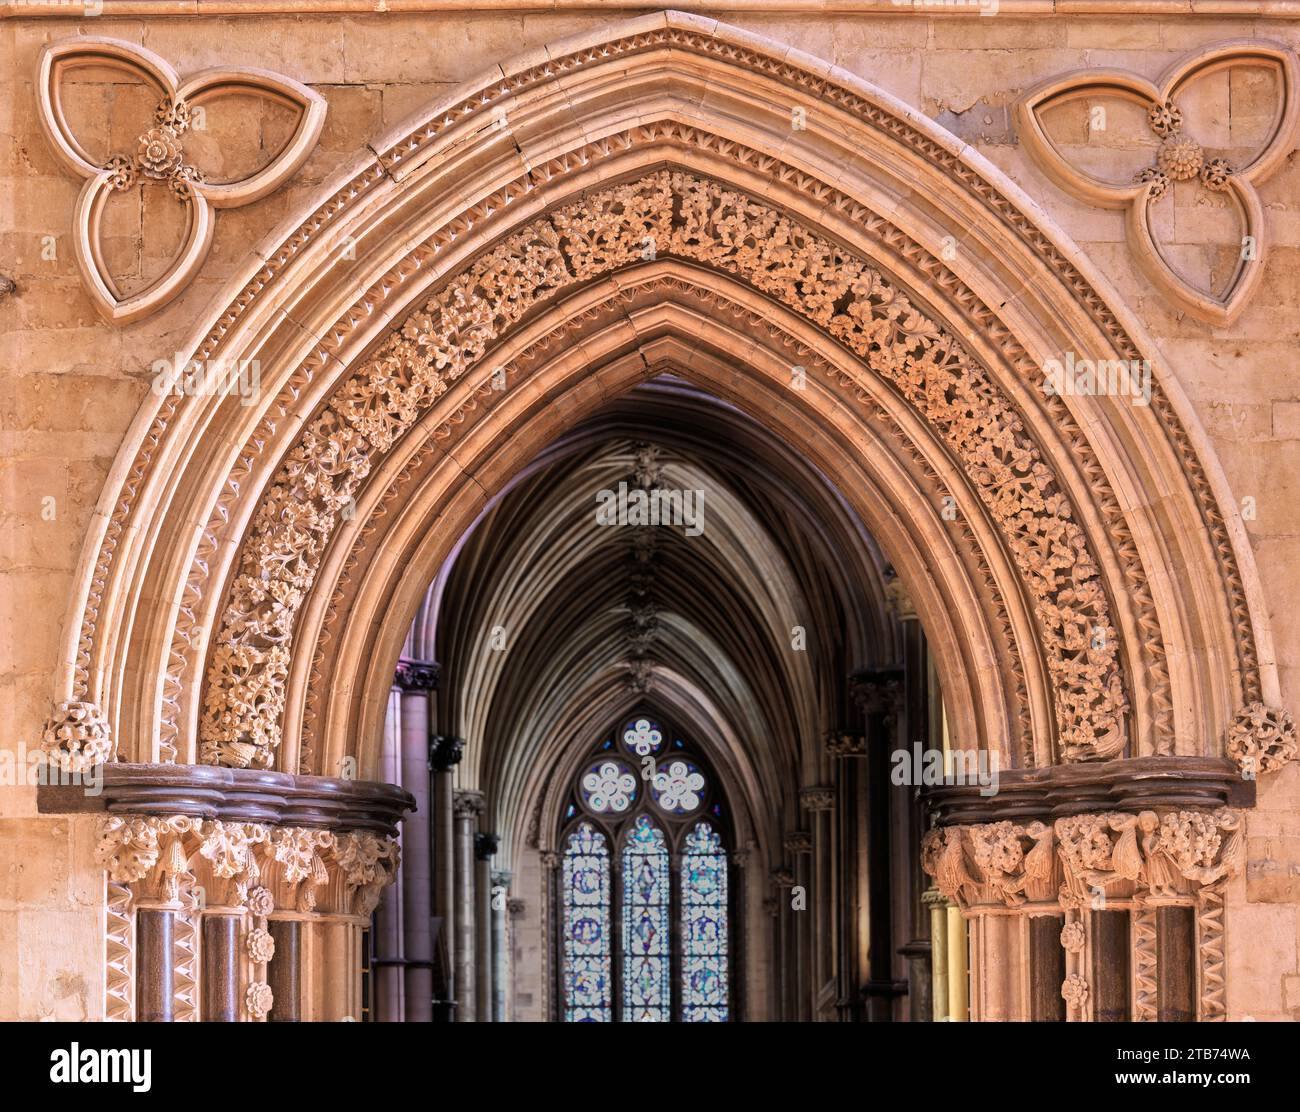 Elaborate arch on the north aisle over the transition from the nave to the chancel in the christian medieval cathedral at Lincoln, England. Stock Photo